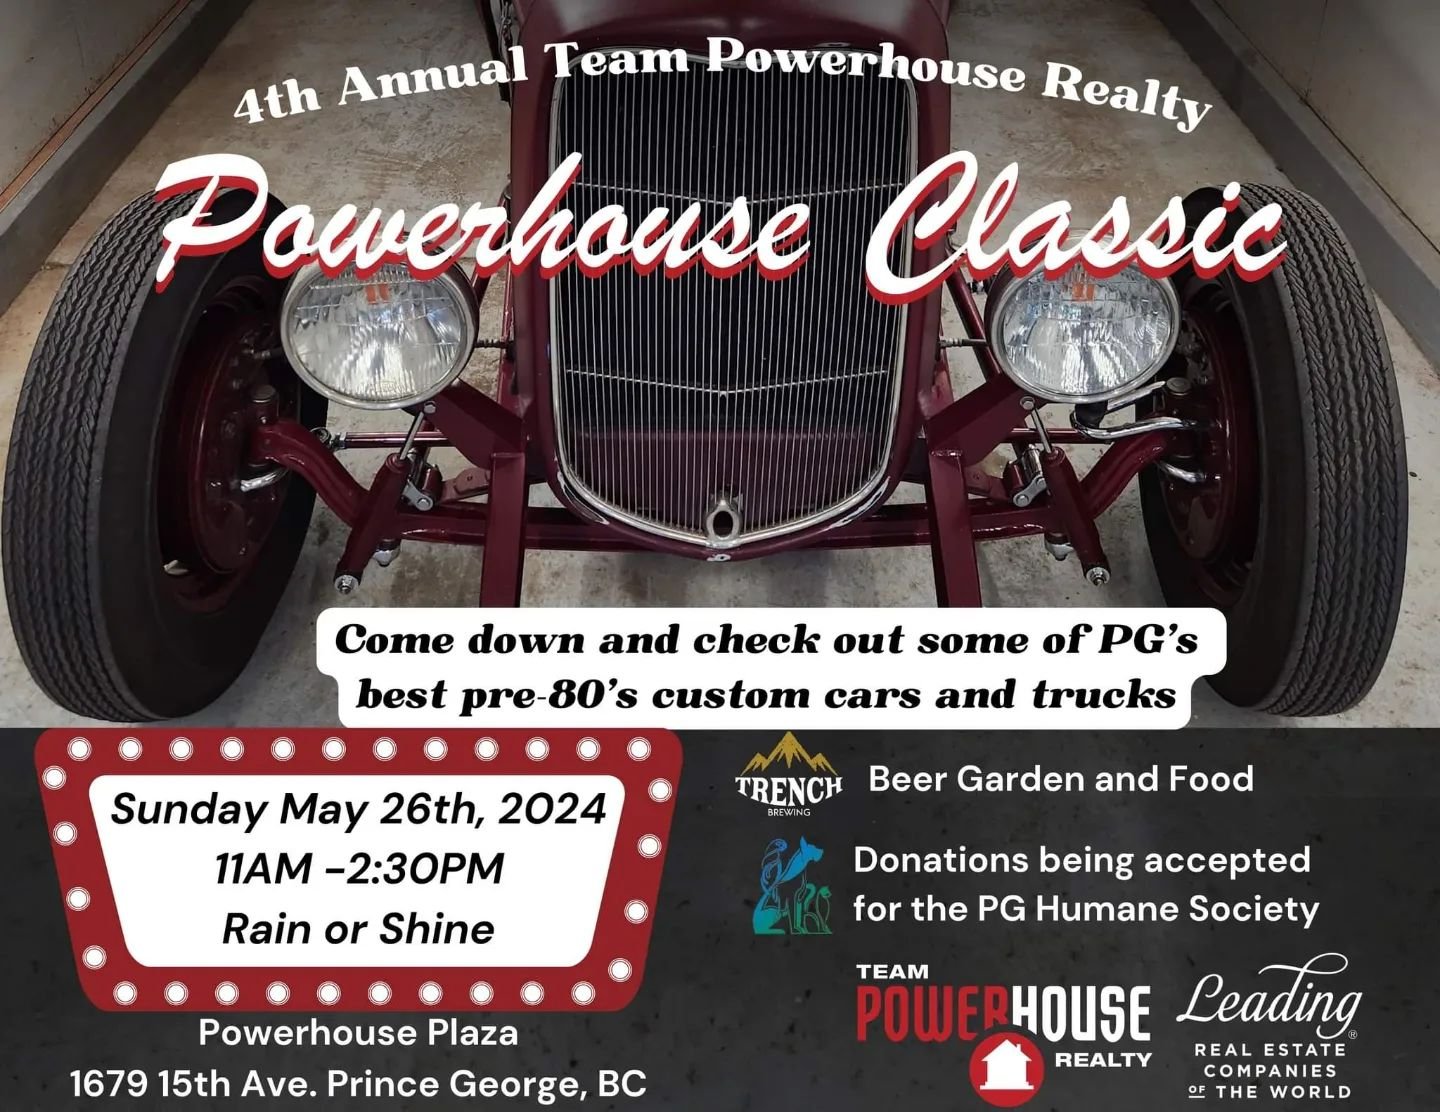 The 4th Annual Powerhouse Classic!🚘
May 26th, 2024  11 AM - 2:30 PM
Join us for, Cars, Beer, and Food! 
Bring a donation for the PG Humane Society! 🐶🐾
@trenchbrewing_distilling 
@team_powerhouse 
@pghumanesociety 

#classiccars #princegeorgebc #co